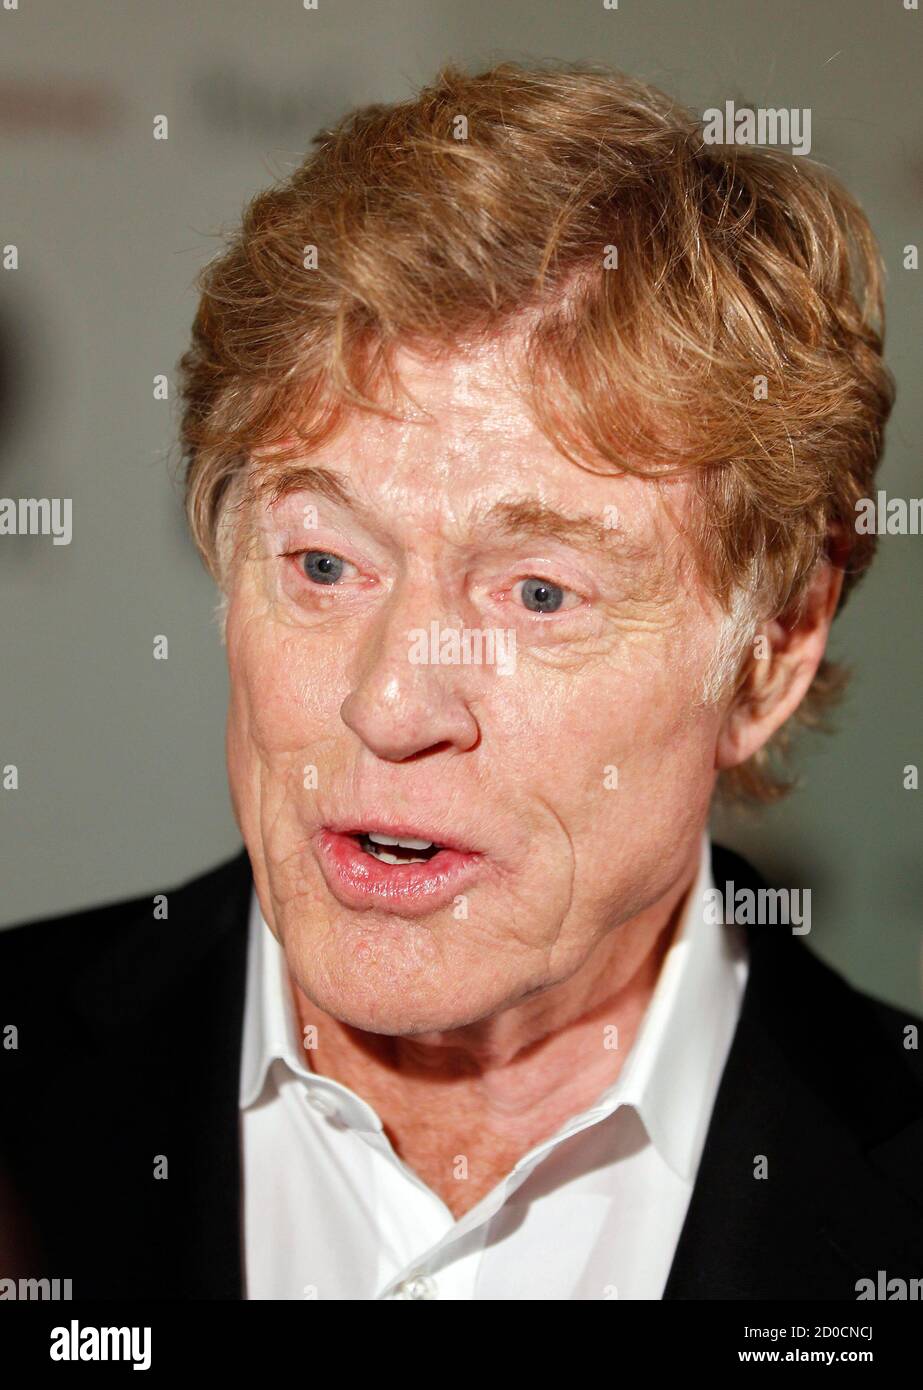 Director Robert Redford arrives at the premiere of "The Conspirator" in New  York April 11, 2011. REUTERS/Lucas Jackson (UNITED STATES - Tags:  ENTERTAINMENT Stock Photo - Alamy